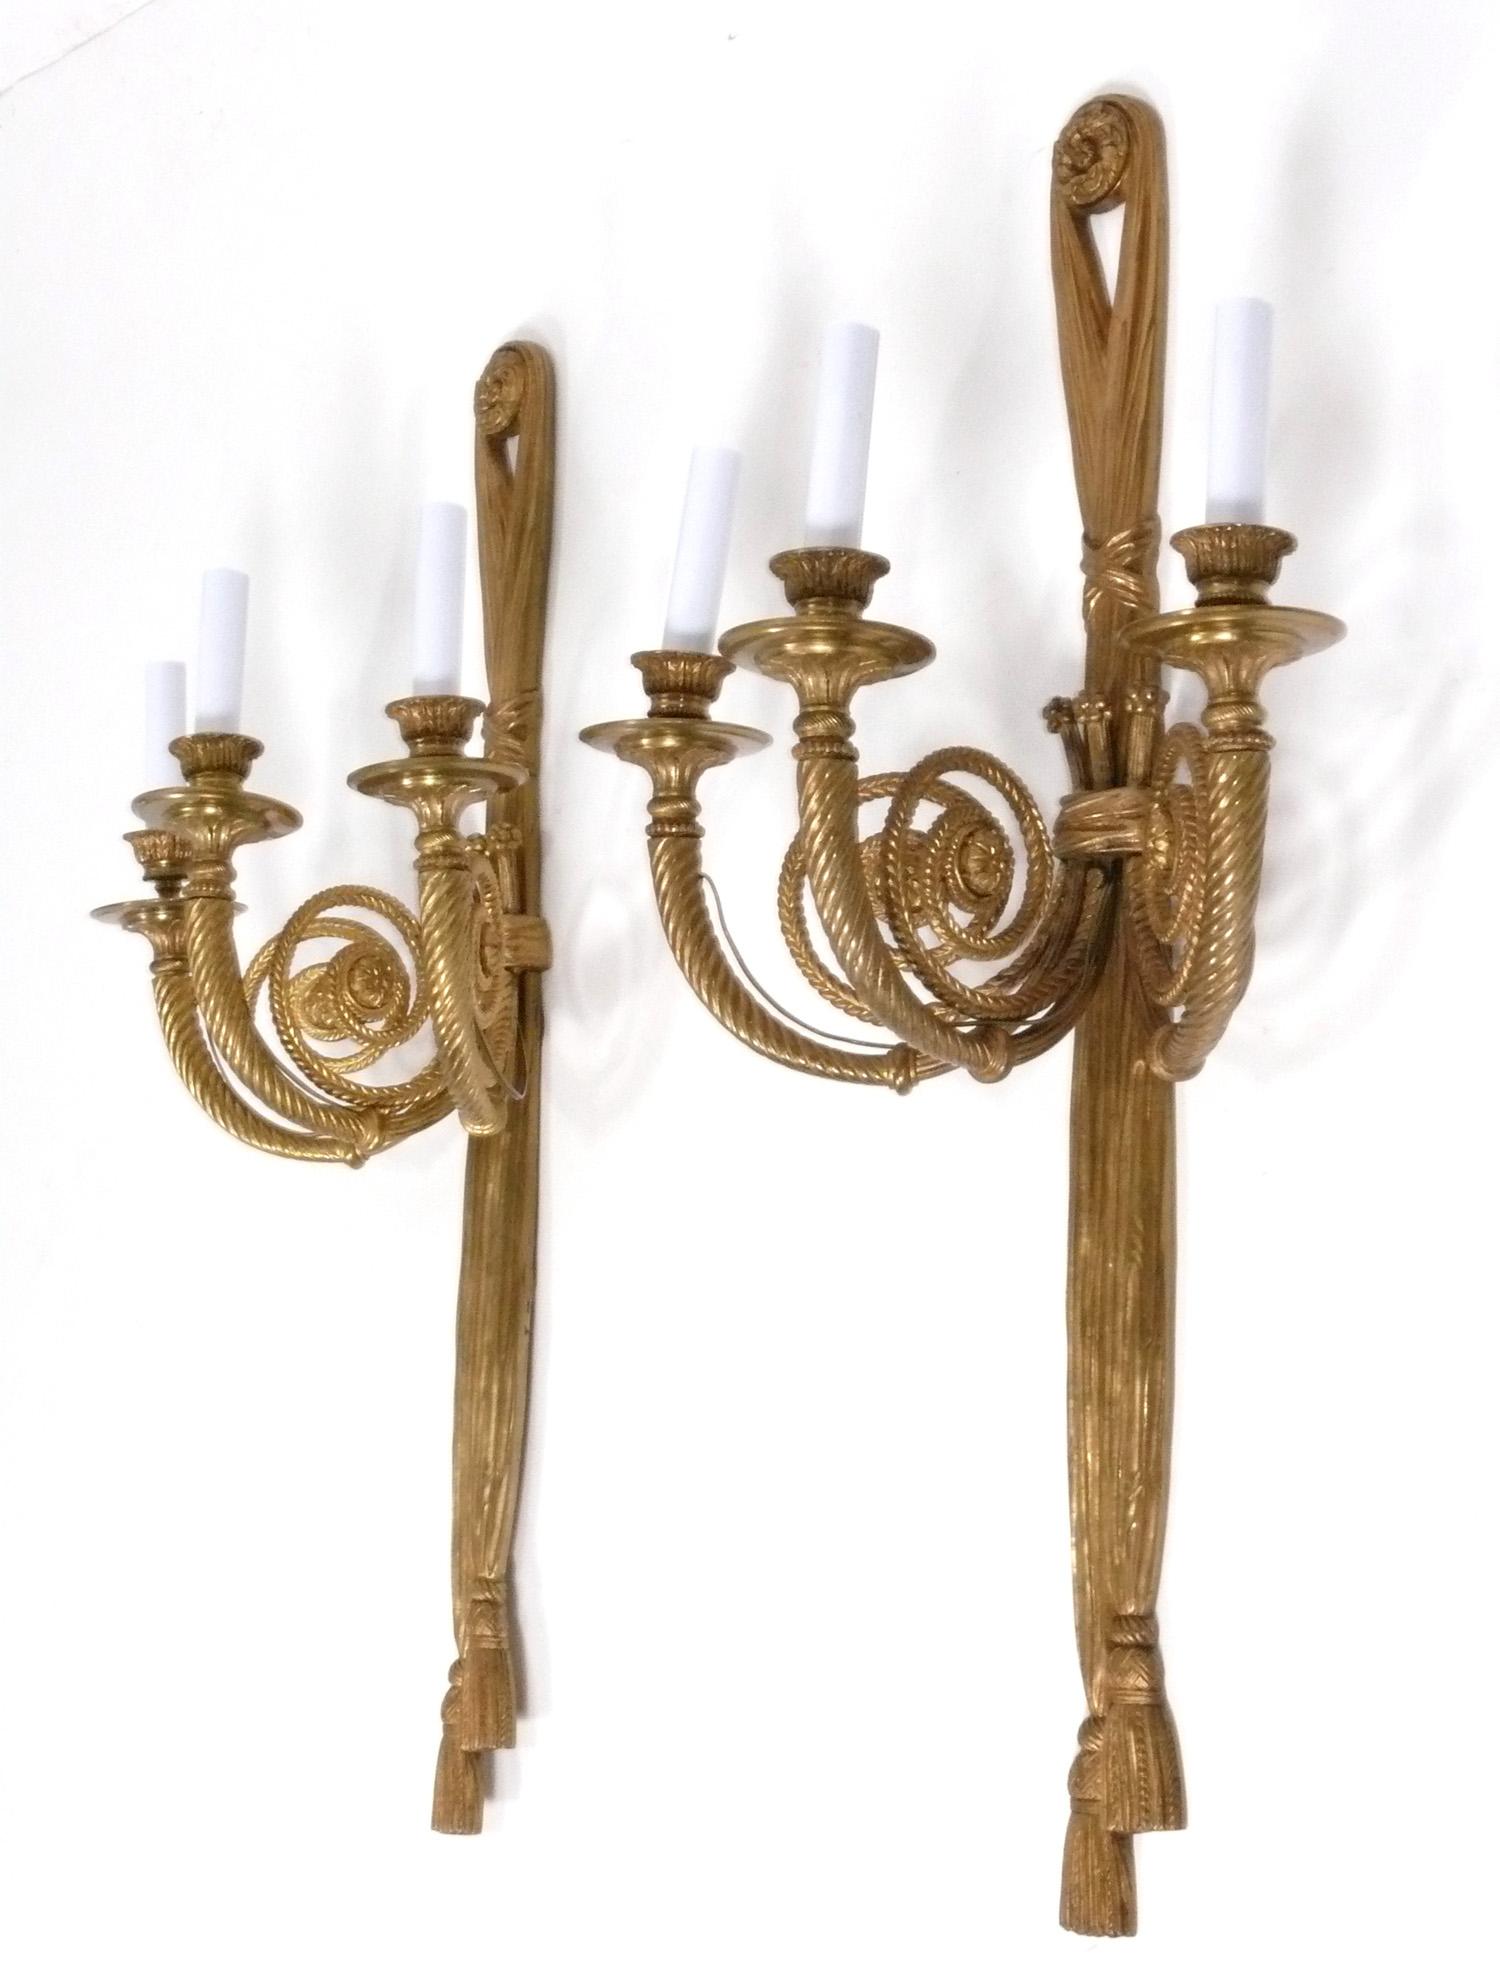 Regency Revival Pair of Brass or Bronze Sconces attributed to Caldwell  For Sale